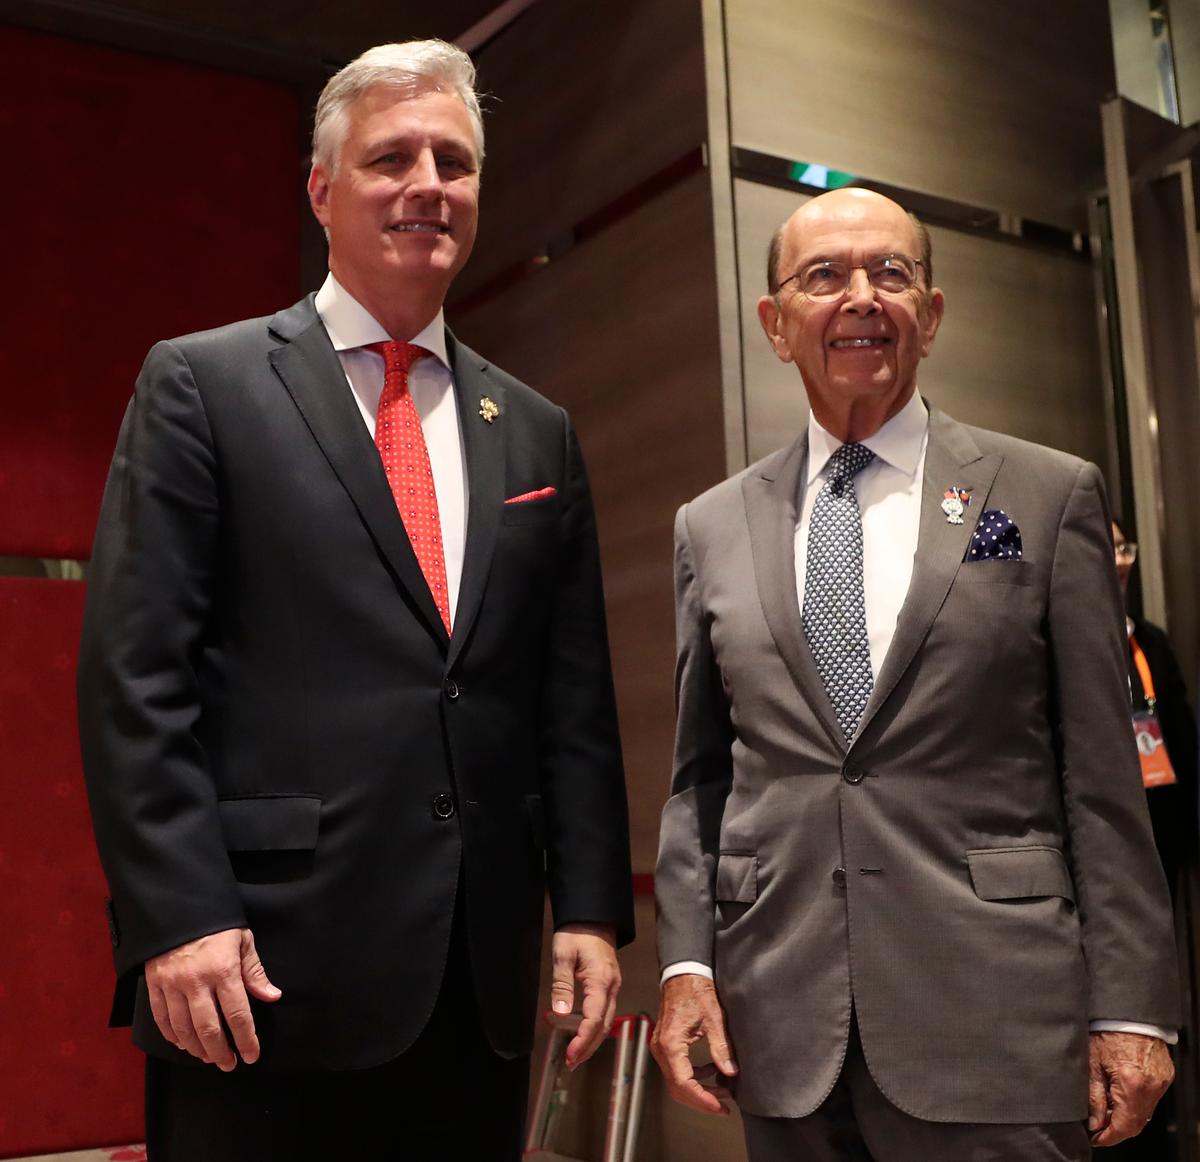 U.S. National Security Adviser Robert O'Brien, left, and Commerce Secretary Wilbur Ross arrive for the bilateral meeting with Japanese Prime Minister Shinzo Abe at the Association of Southeast Asian Nations (ASEAN) summit in Nonthaburi, Thailand on Nov. 4, 2019. (Aijaz Rahi/AP)